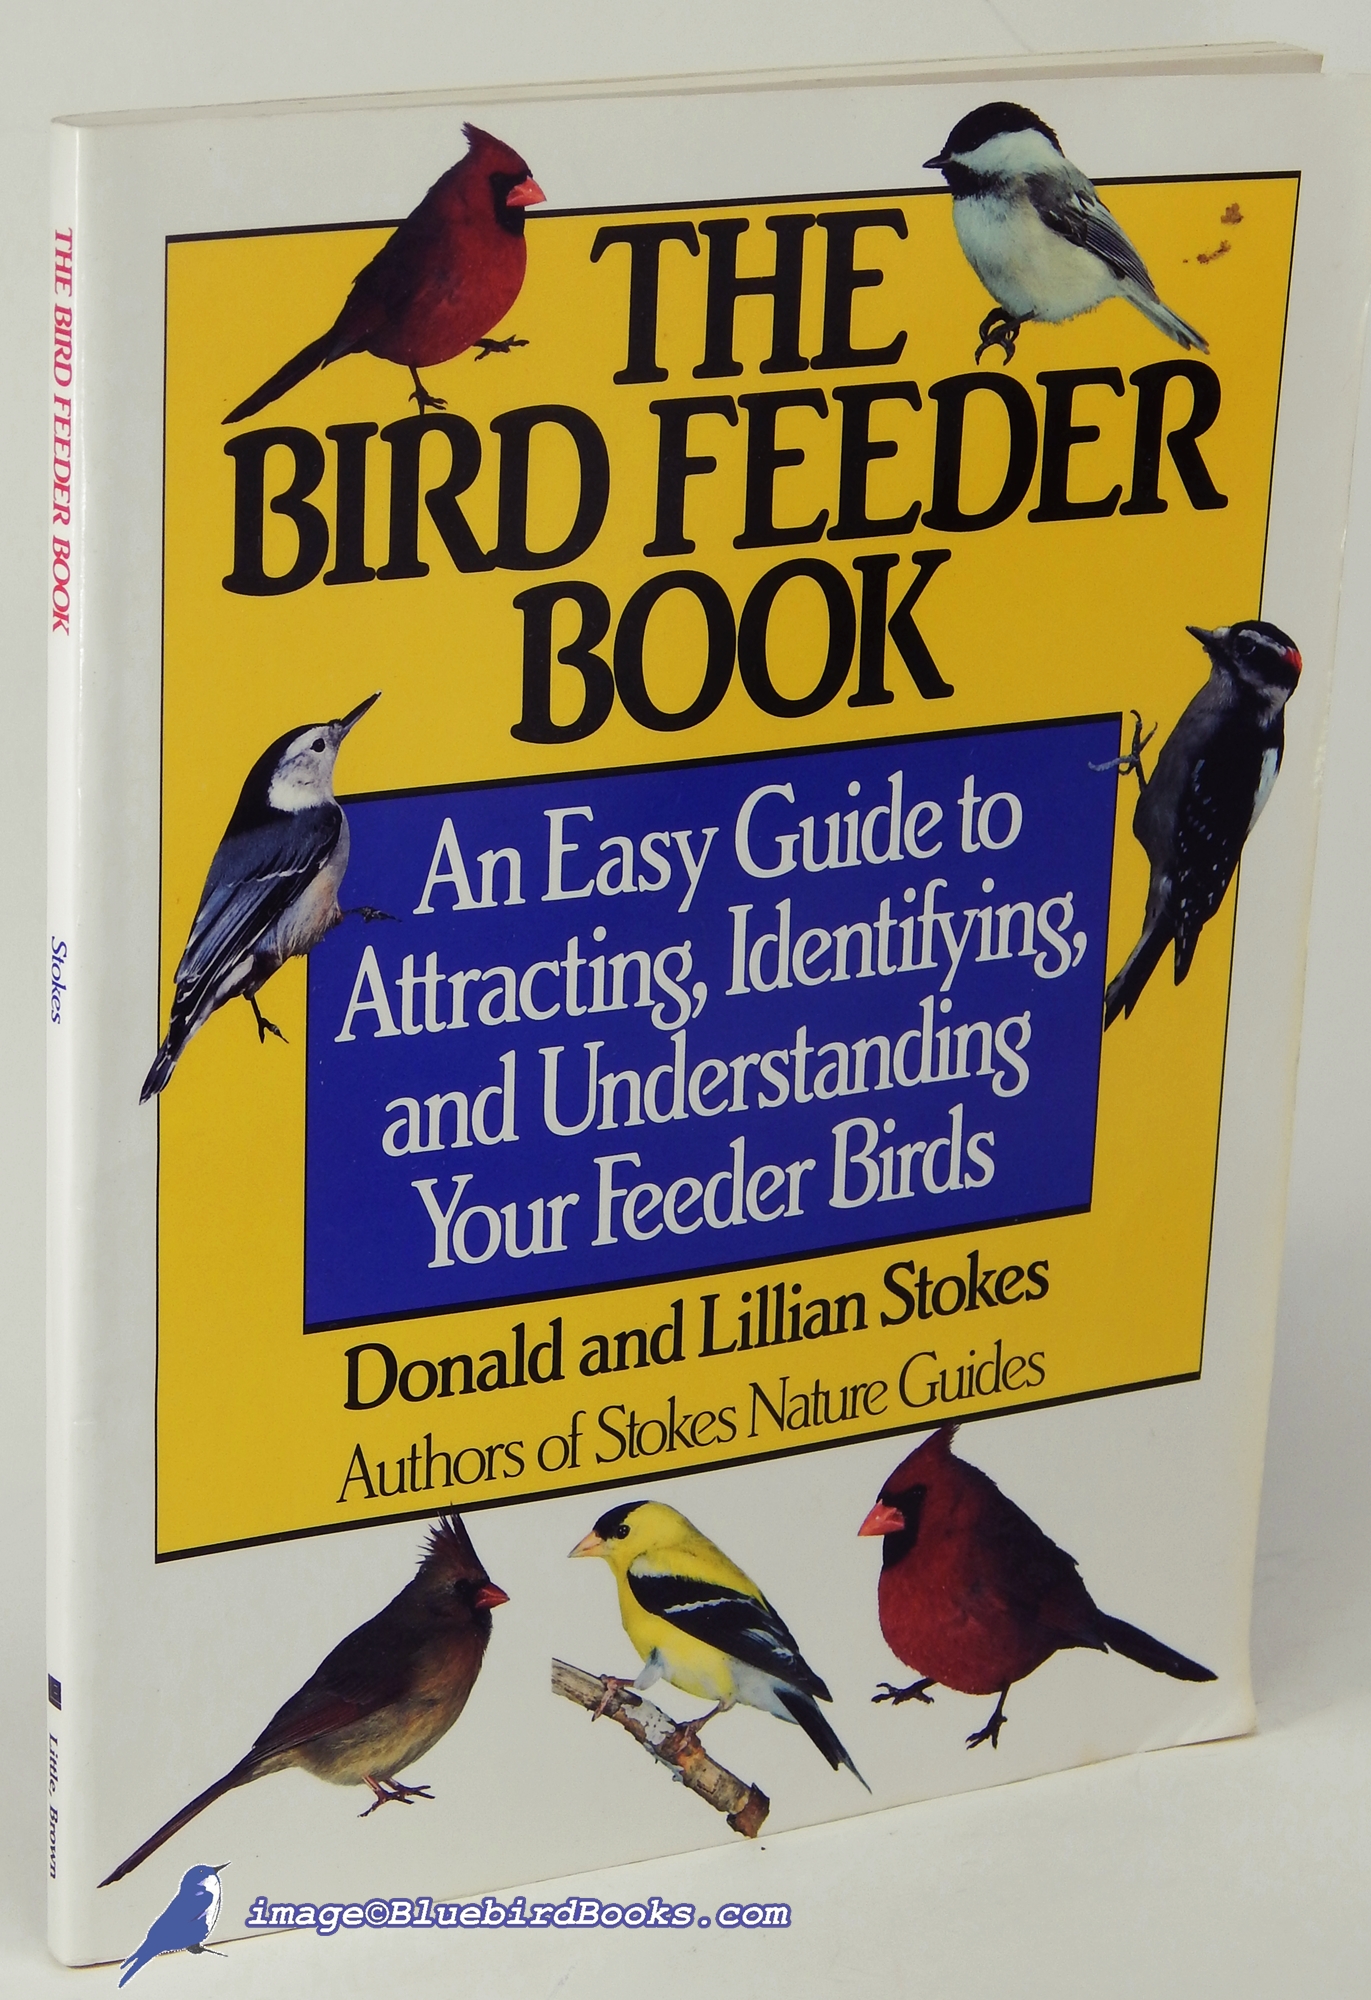 STOKES, DONALD AND LILLIAN - The Bird Feeder Book: An Easy Guide to Attracting, Indentifying, and Understanding Your Feeder Birds